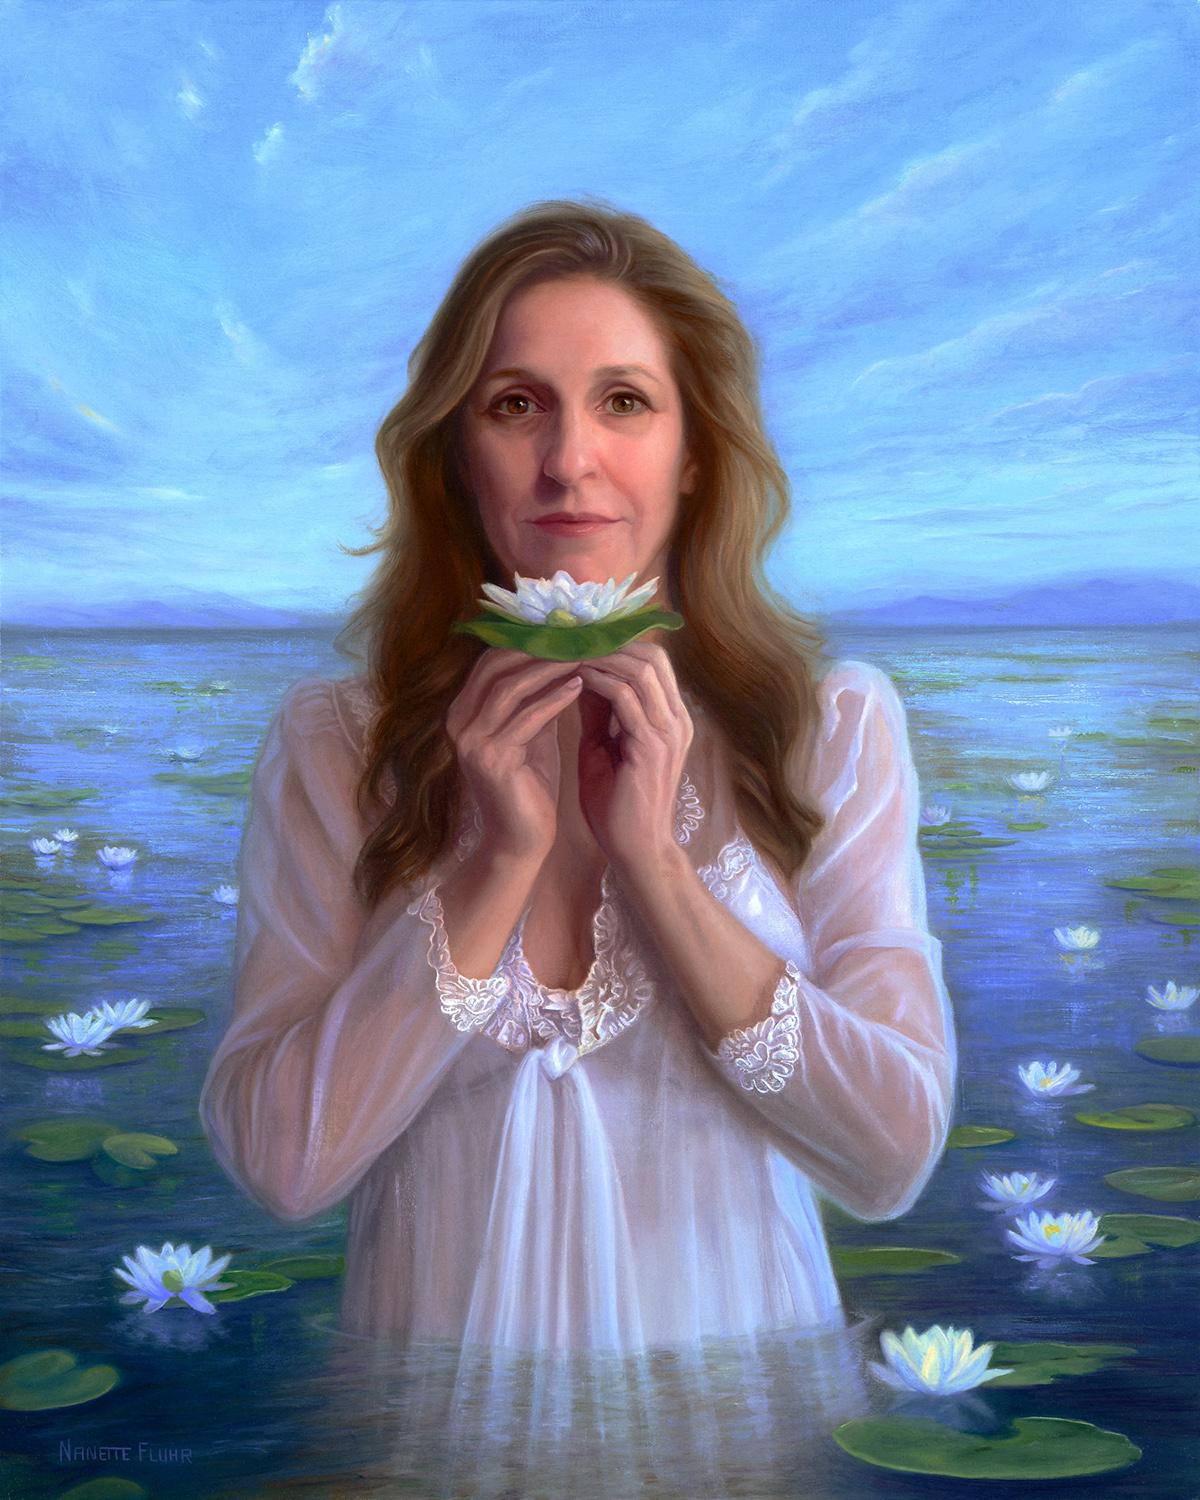 oil painting of woman wearing a white gown in a pond looking at the viewer, holding a lotus flower